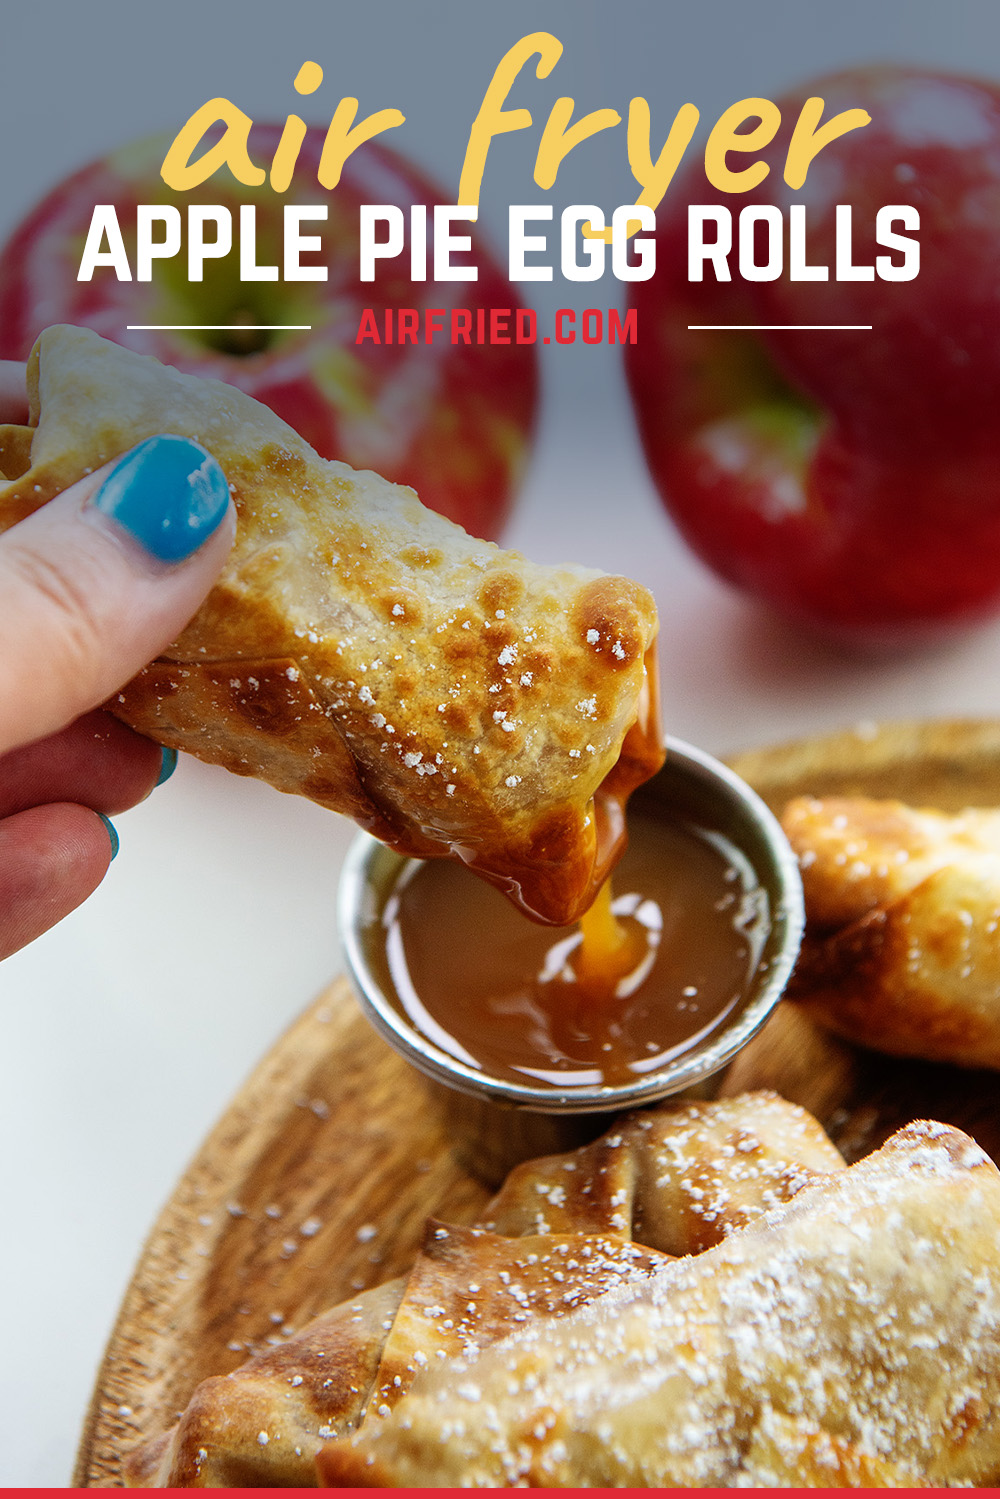 I love fruits dipped in caramel, but these apple pie egg rolls take that experience to another level!